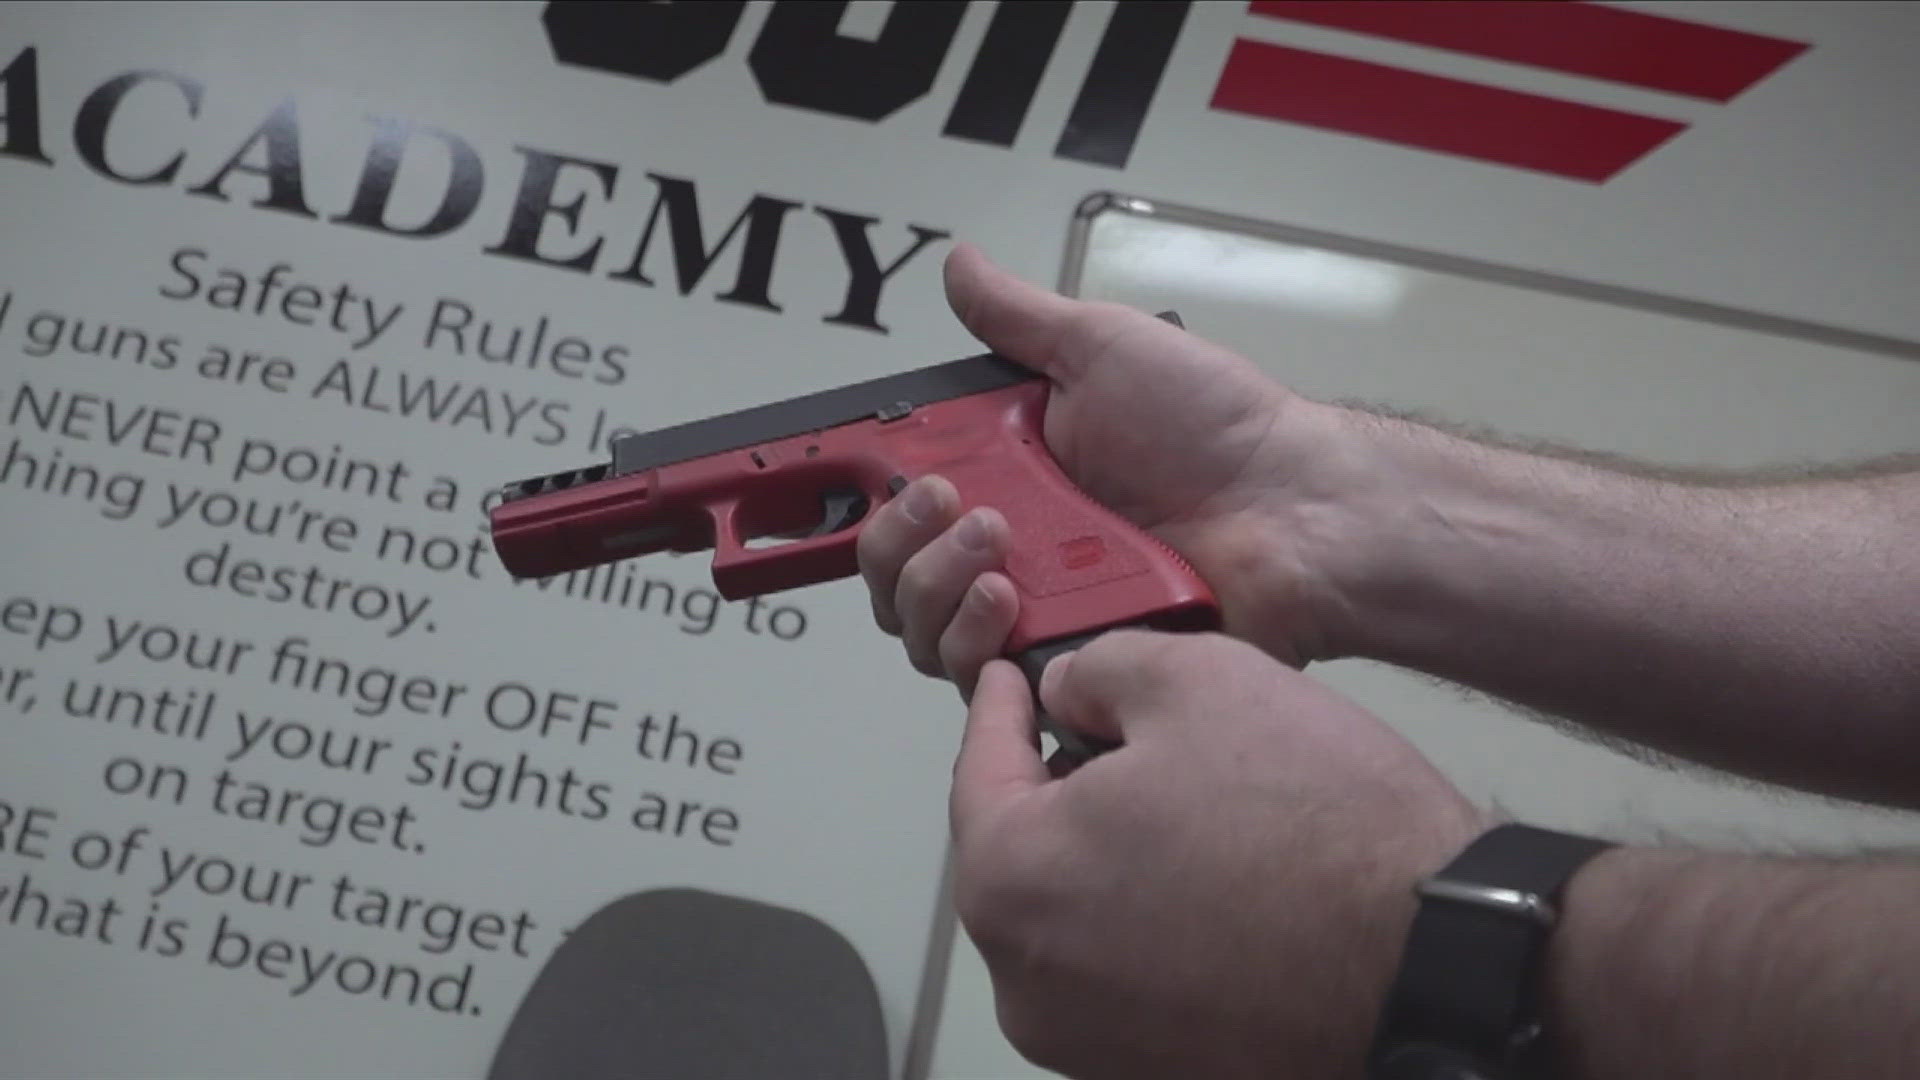 After a law passed that would allow teachers to carry firearms in Tennessee classrooms, school leaders in the Memphis area share why they're against it.